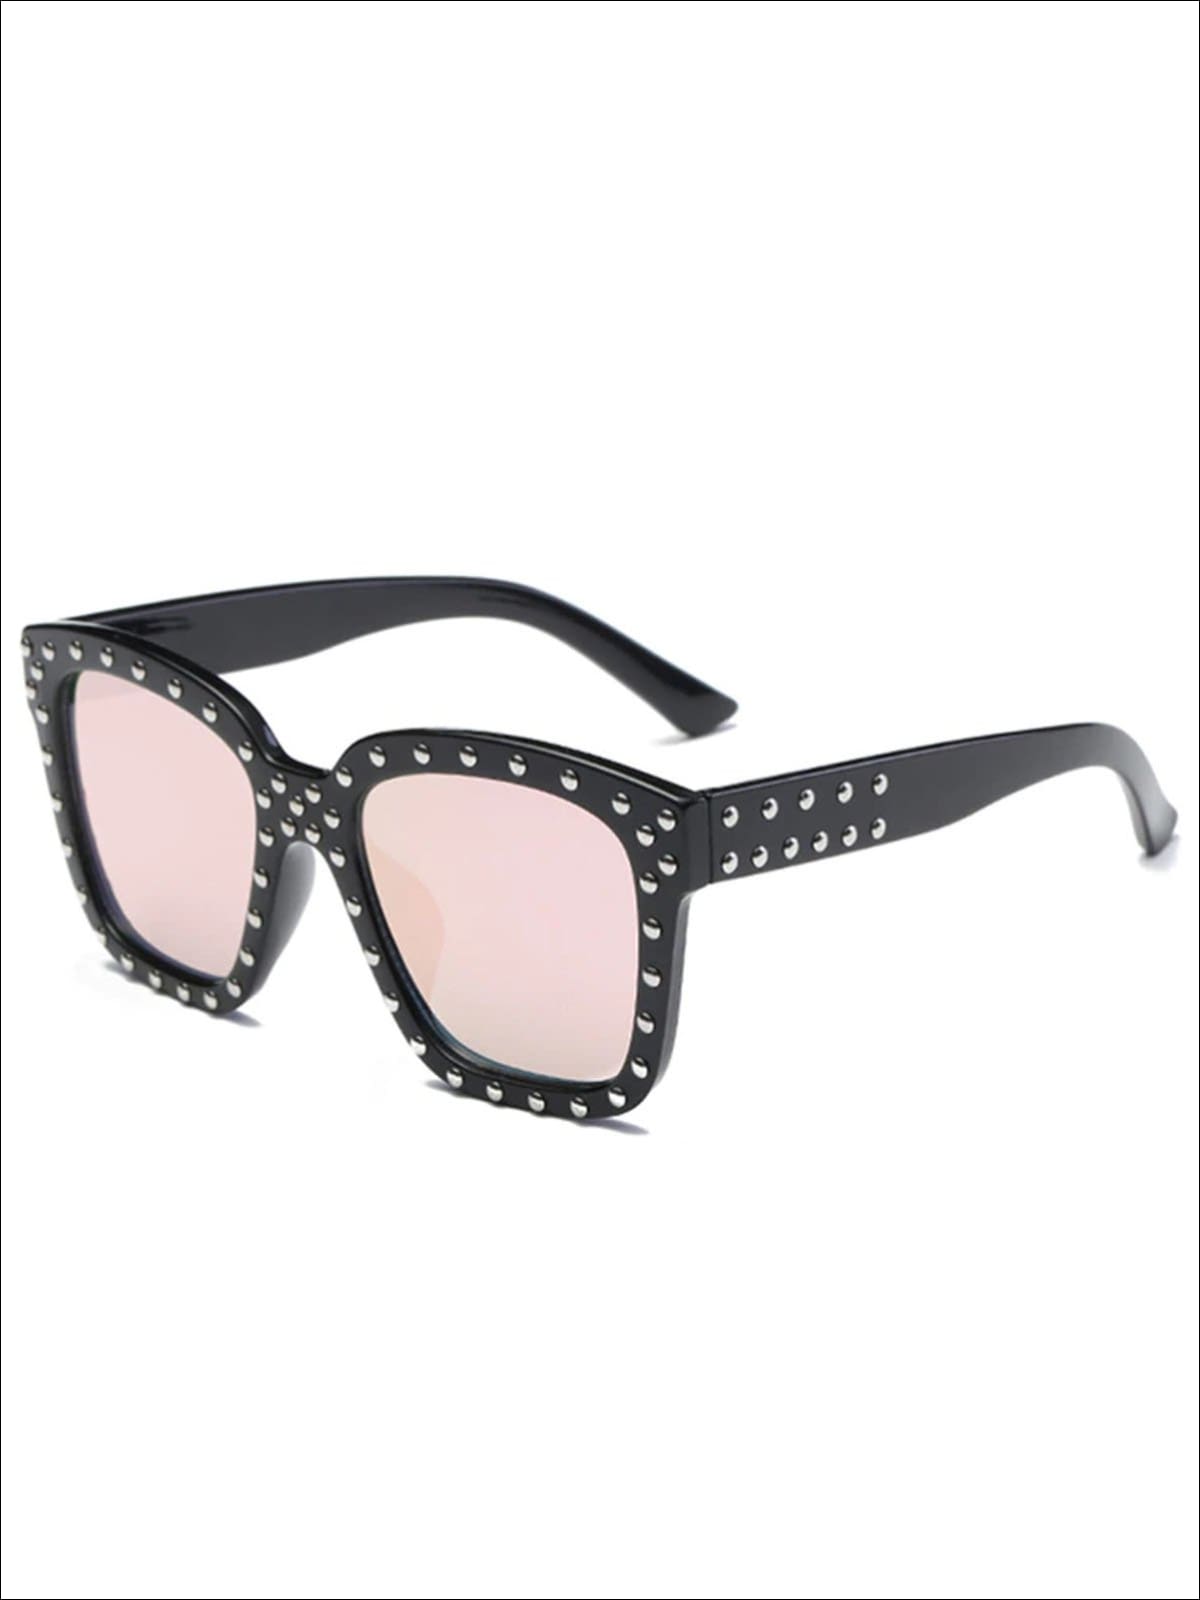 Girls Studded Square Frame Sunglasses - Pink - Girls Accessories